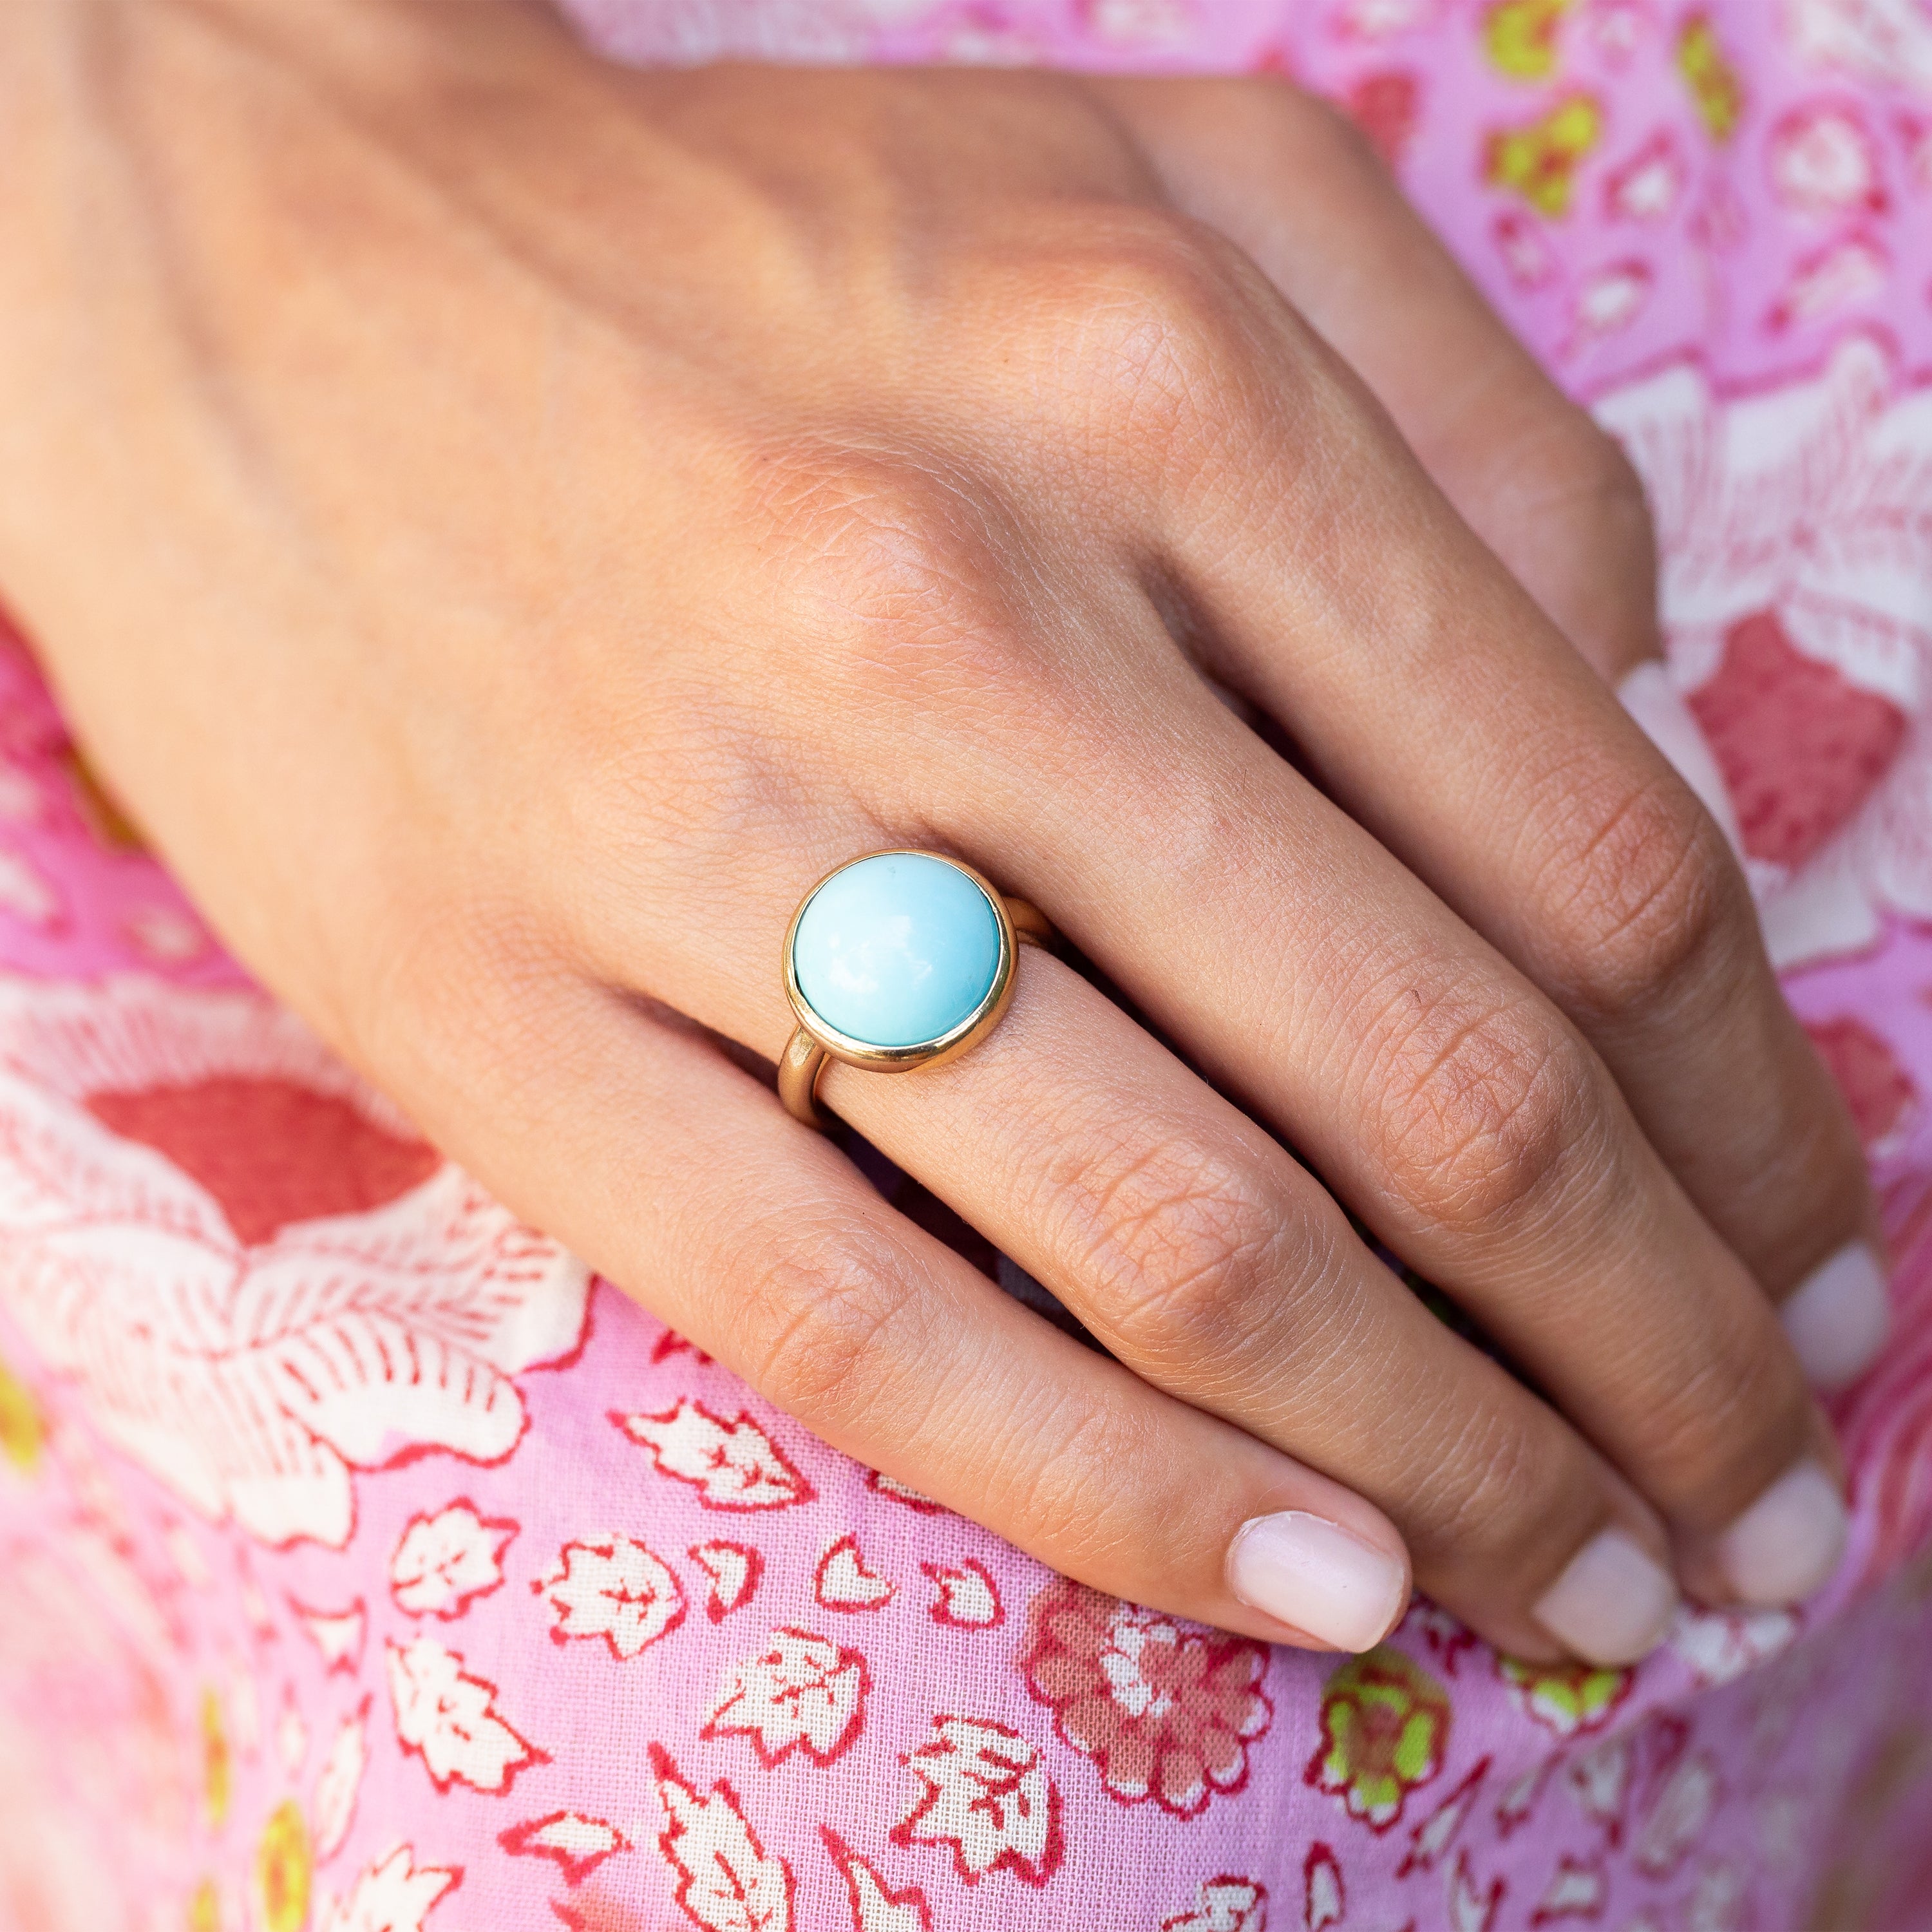 The F&B Turquoise and 14k Gold Ring